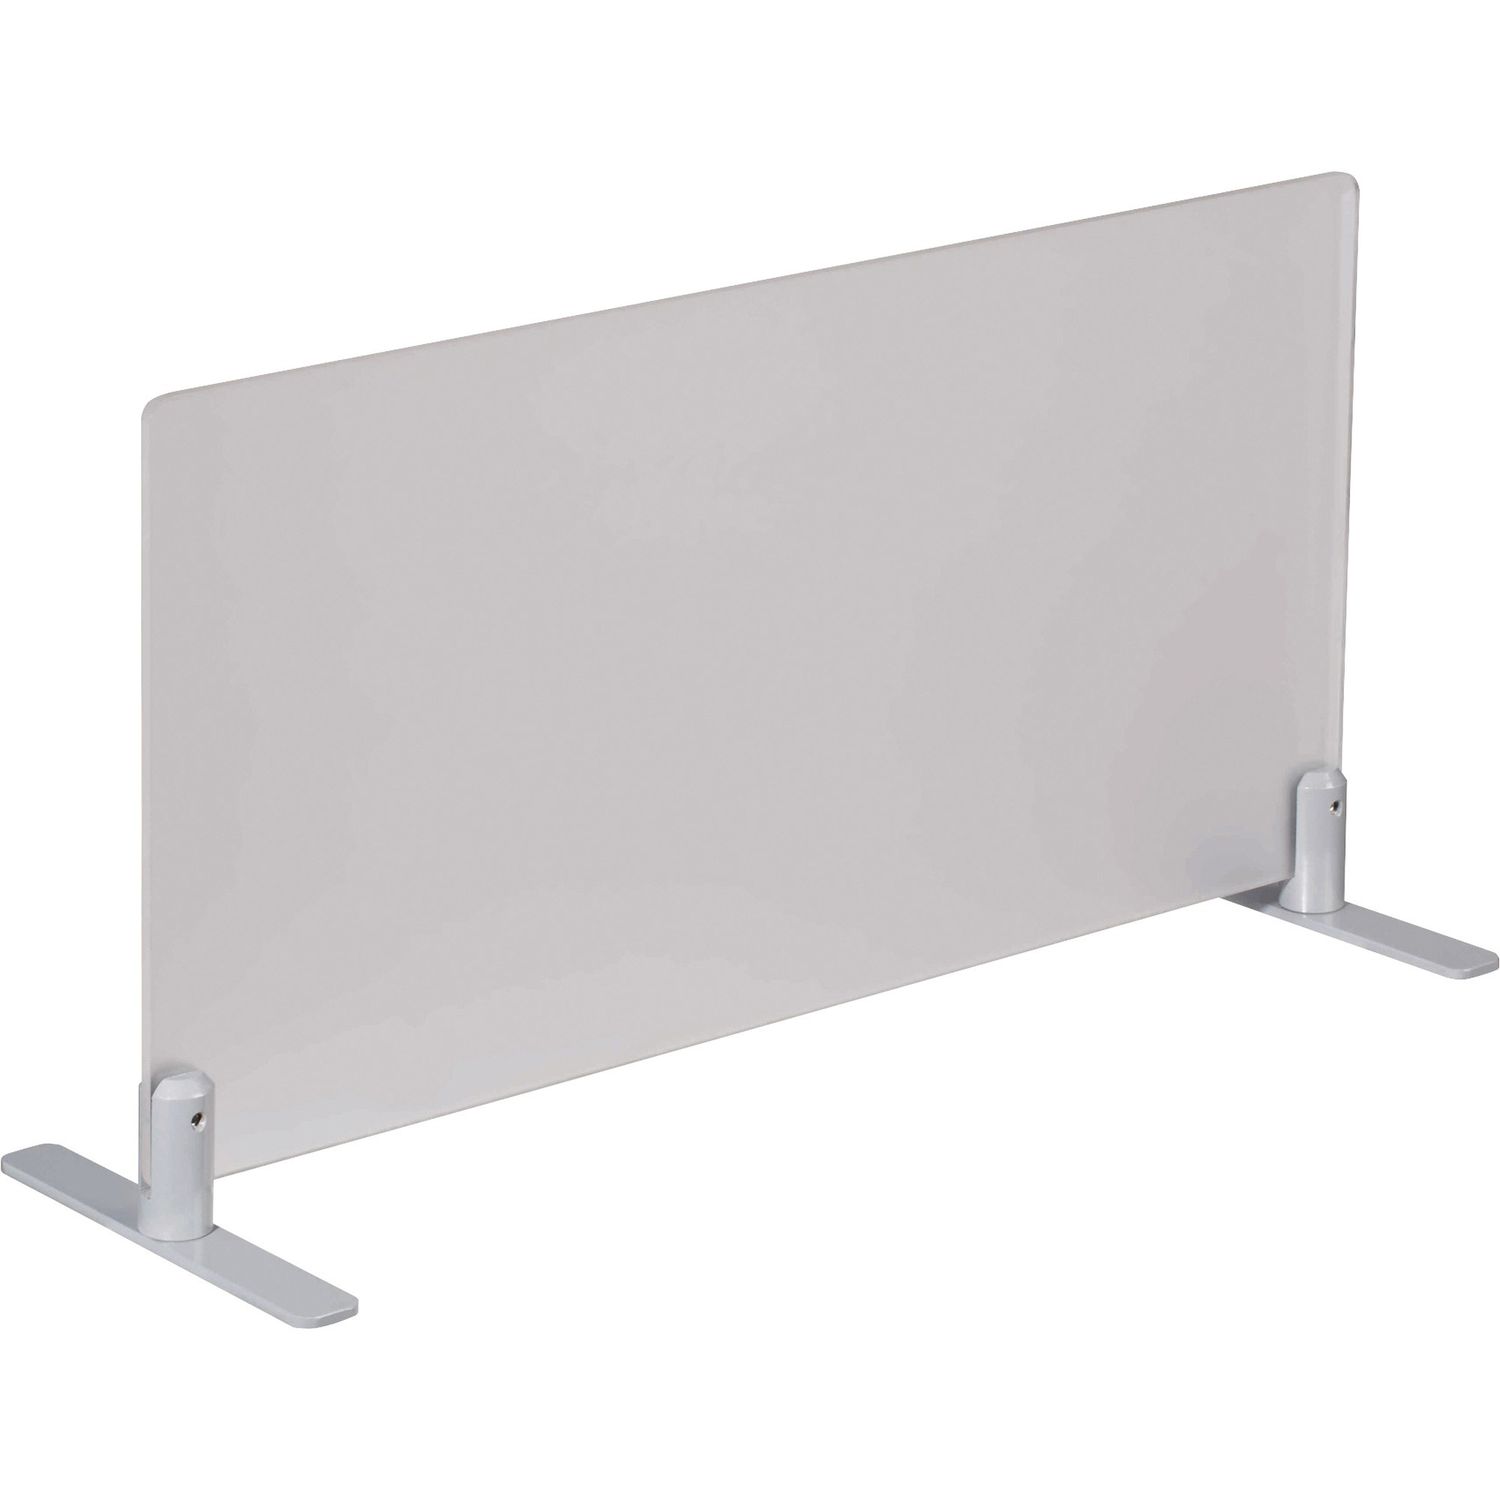 Concordia Frost Surf Upper Desk Partitions 35.4" Width x 12.6" Height x 7.6" Depth, Metal, Frosted, 1 Each